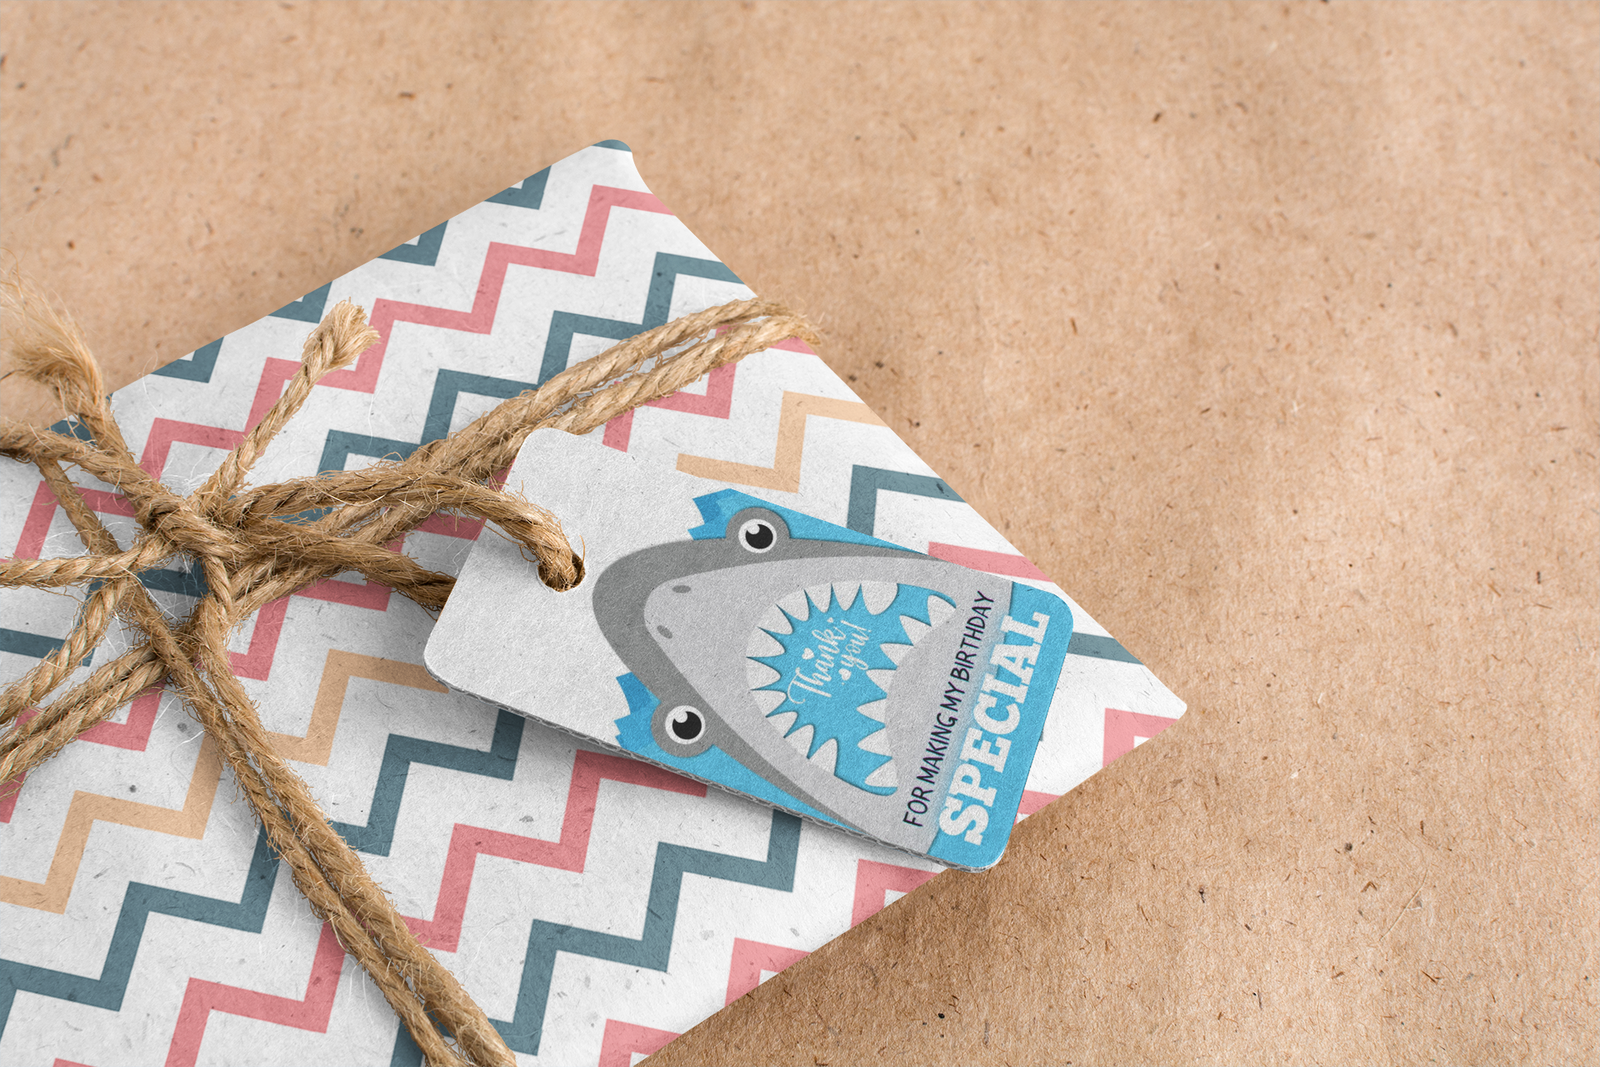 Shark Theme Birthday Favour Tags (2 x 3.5 inches/250 GSM Cardstock/Gray, White, Light Blue, Black/30Pcs)